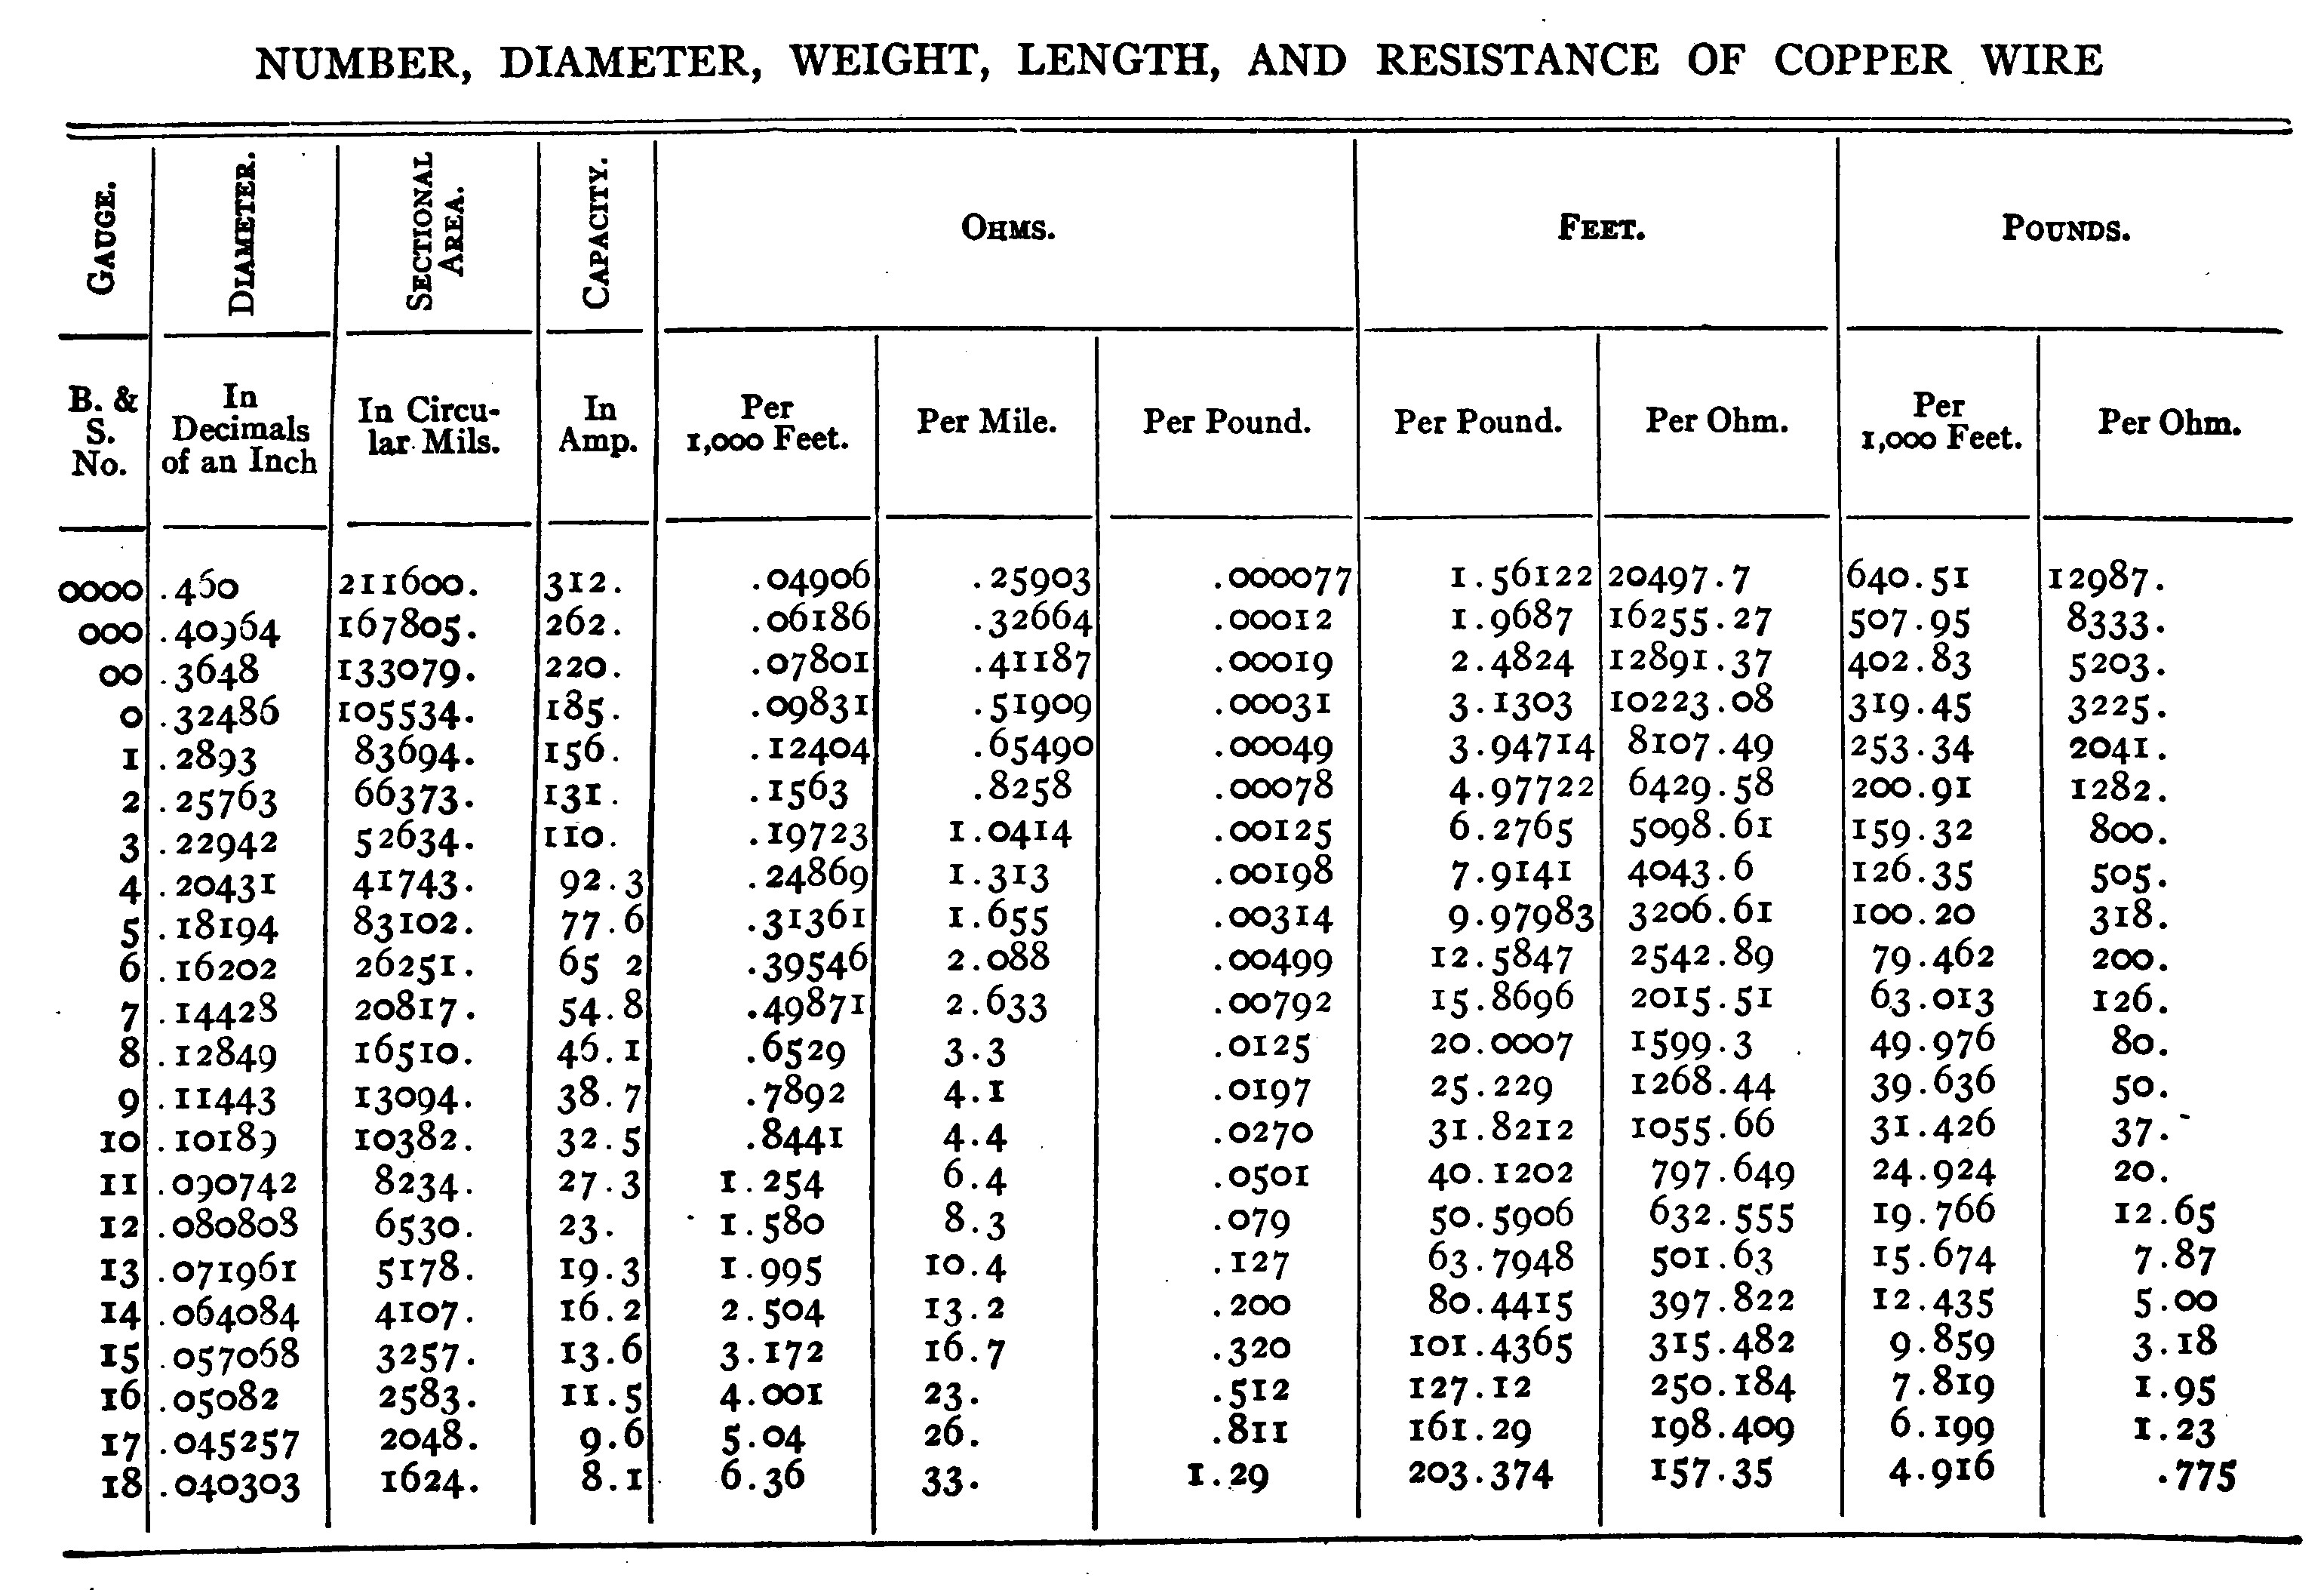 NUMBER, DIAMETER, WEIGHT, LENGTH, AND RESISTANCE OF COPPER WIRE